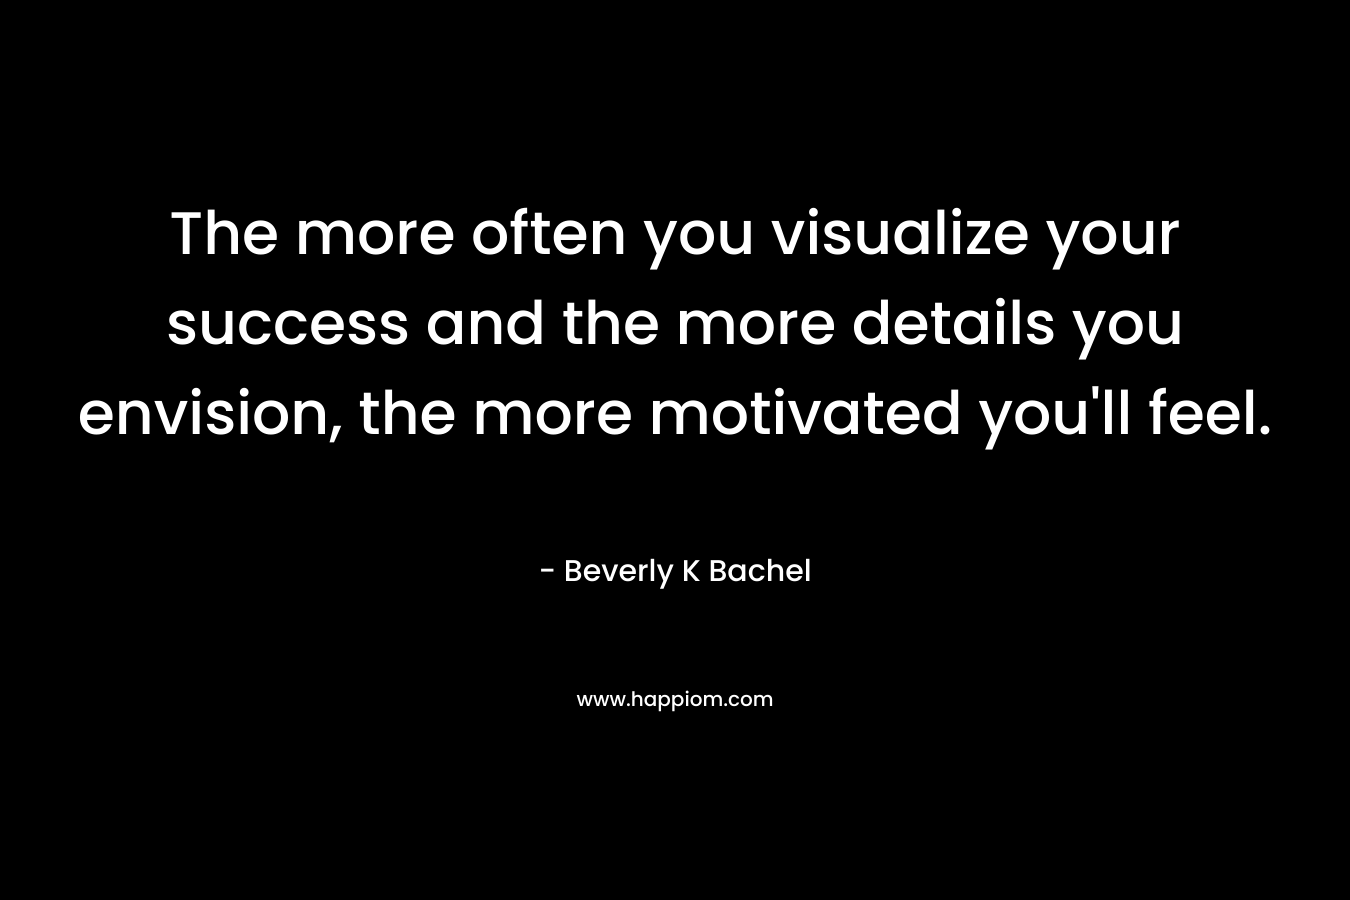 The more often you visualize your success and the more details you envision, the more motivated you’ll feel. – Beverly K Bachel